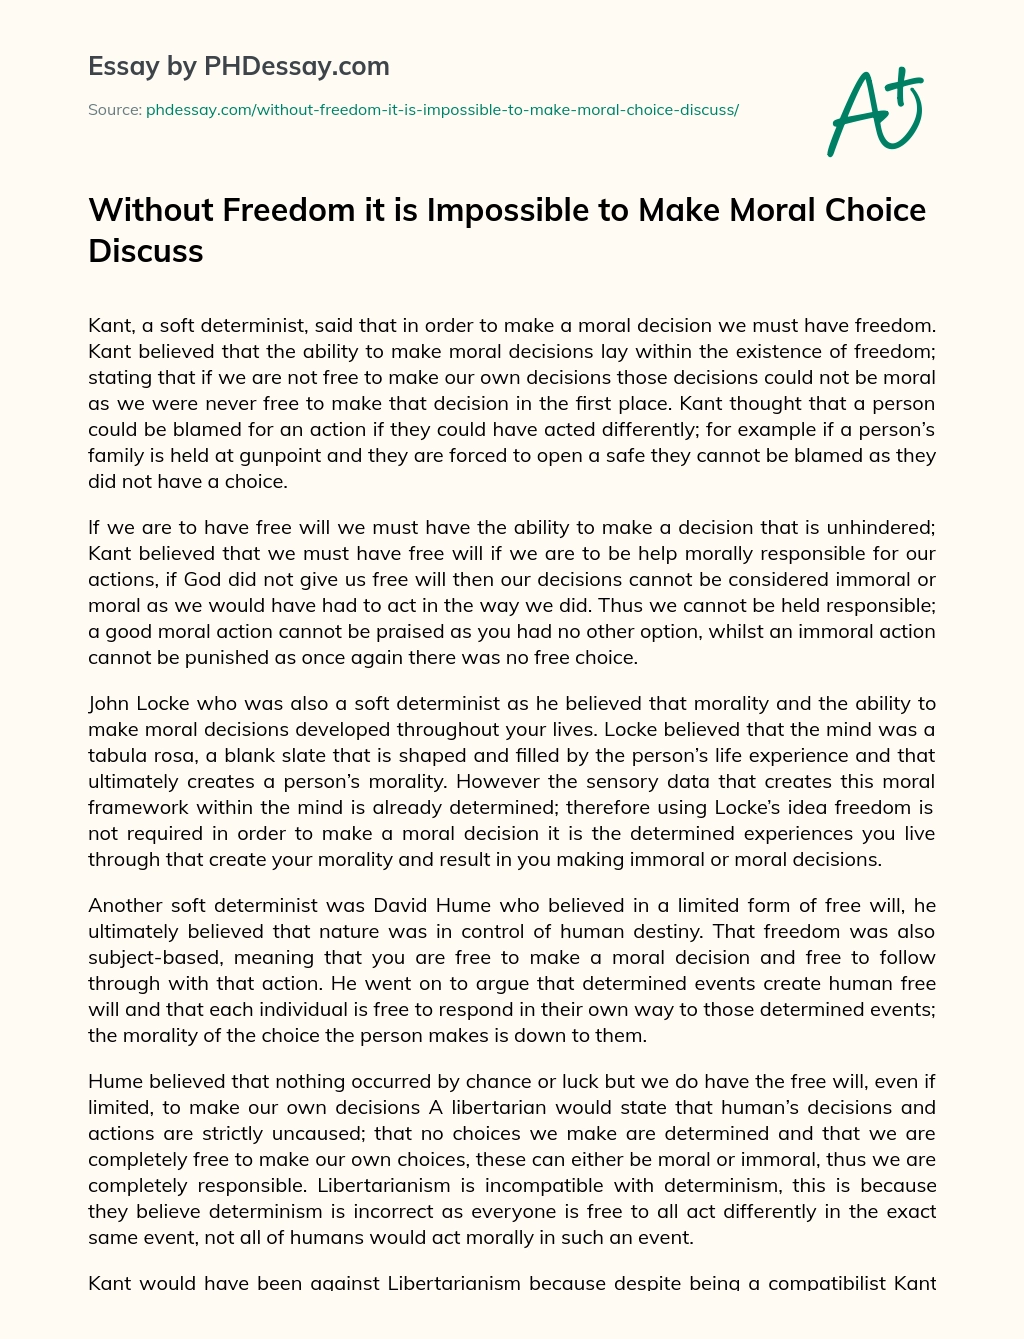 Without Freedom it is Impossible to Make Moral Choice Discuss essay